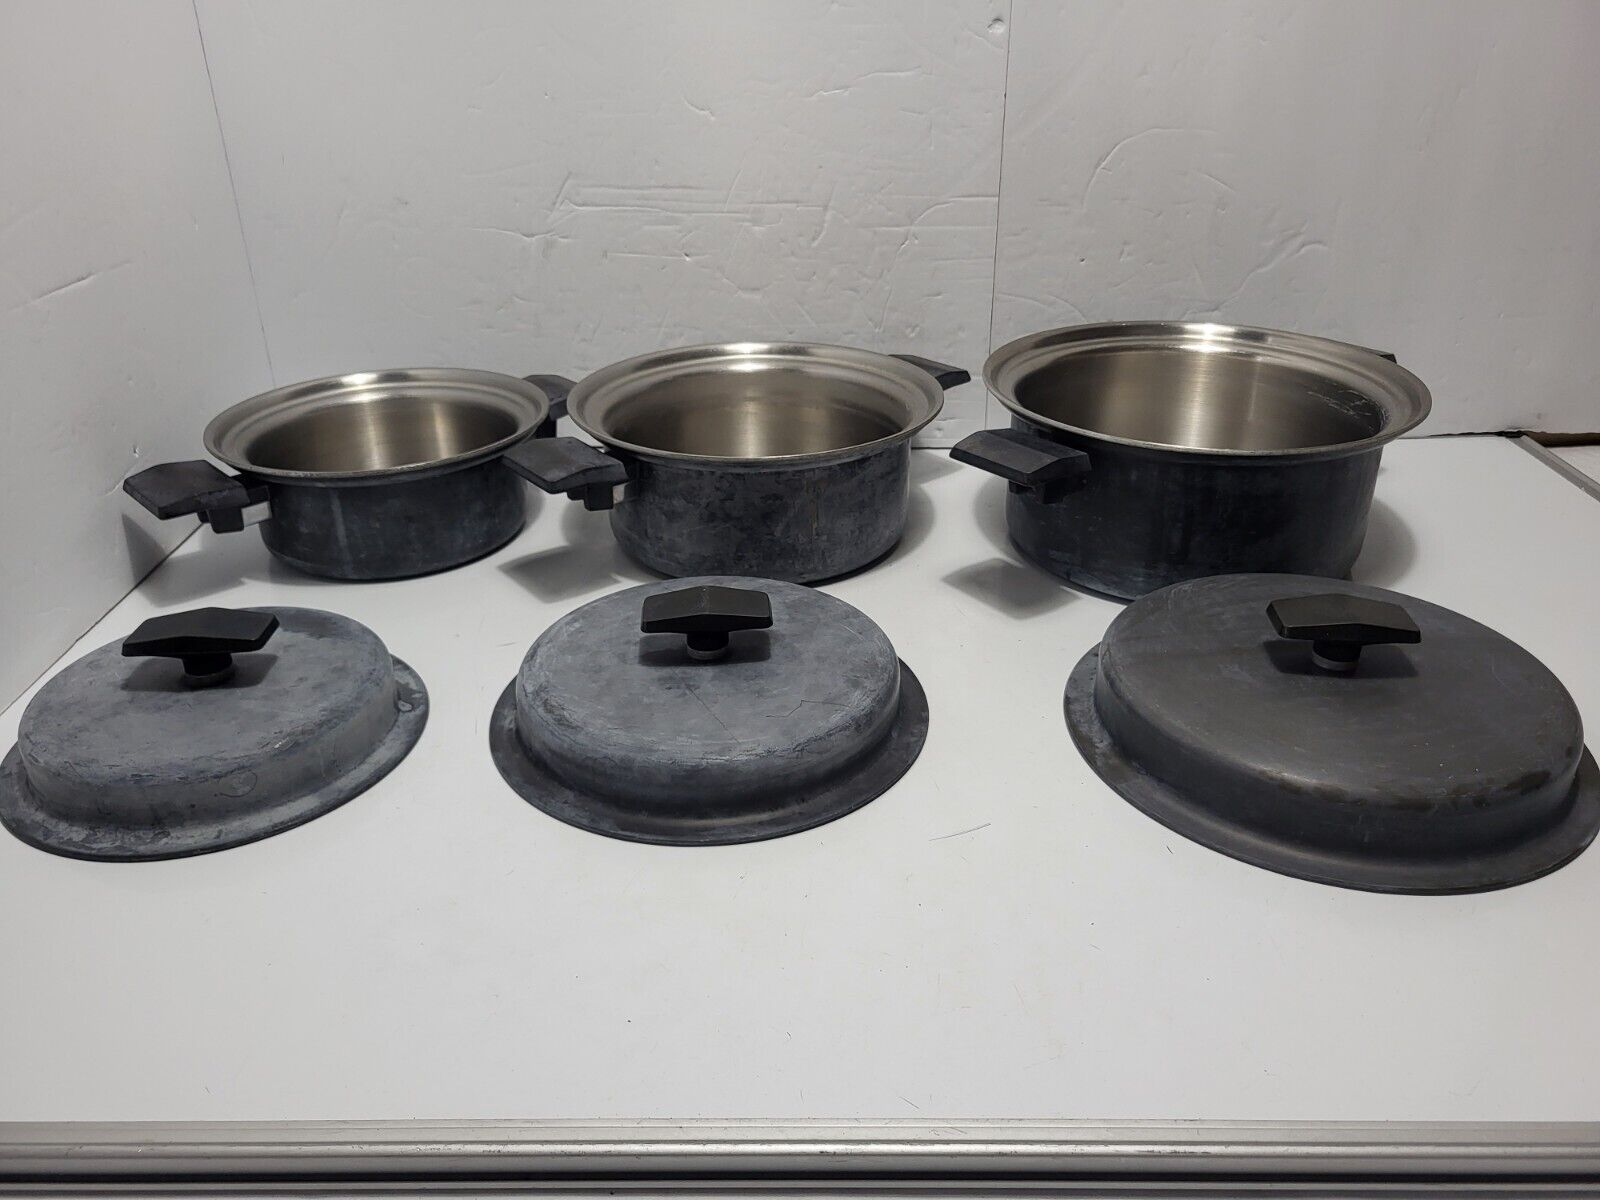 VTG Miracle Maid West Bend 6 Piece Anodized Aluminum Stainless Cookware Set